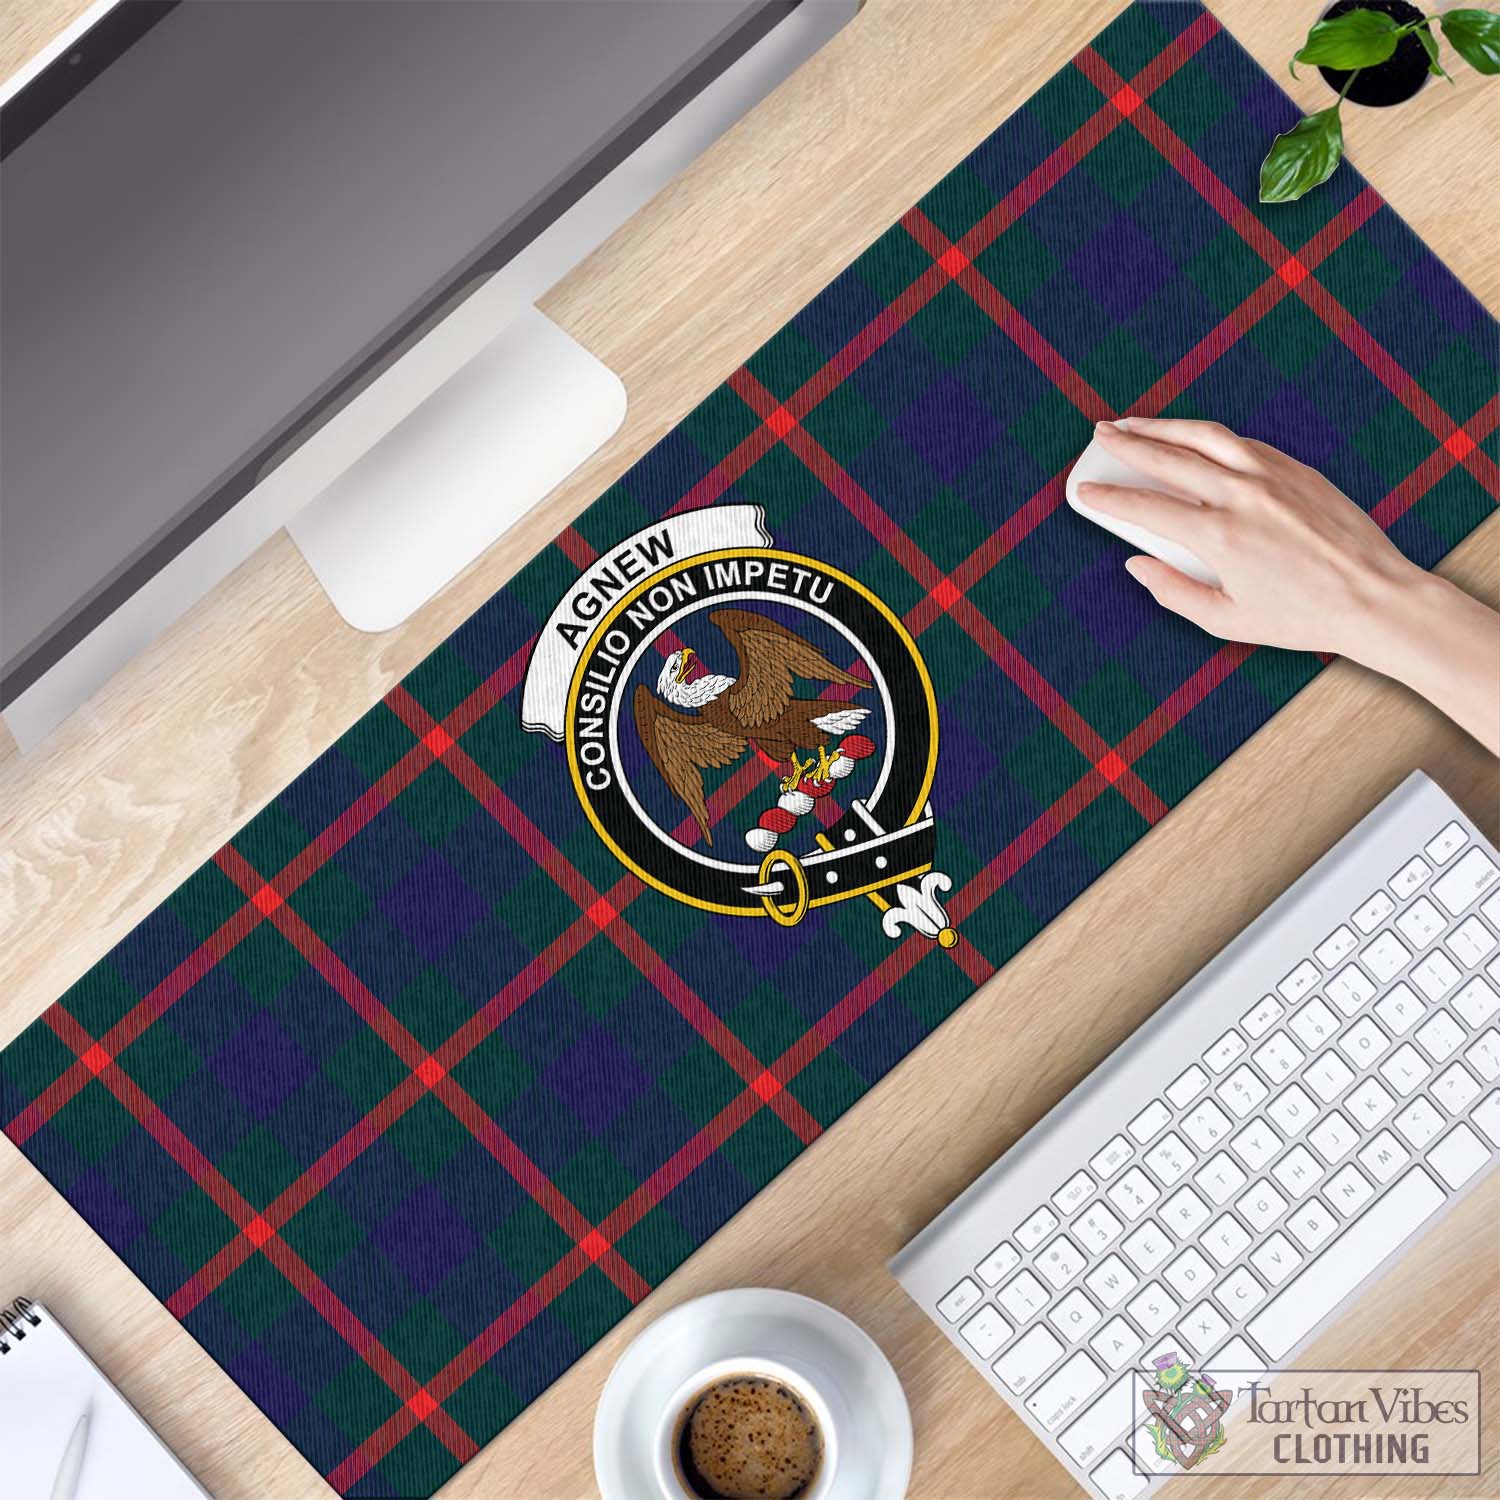 Tartan Vibes Clothing Agnew Modern Tartan Mouse Pad with Family Crest